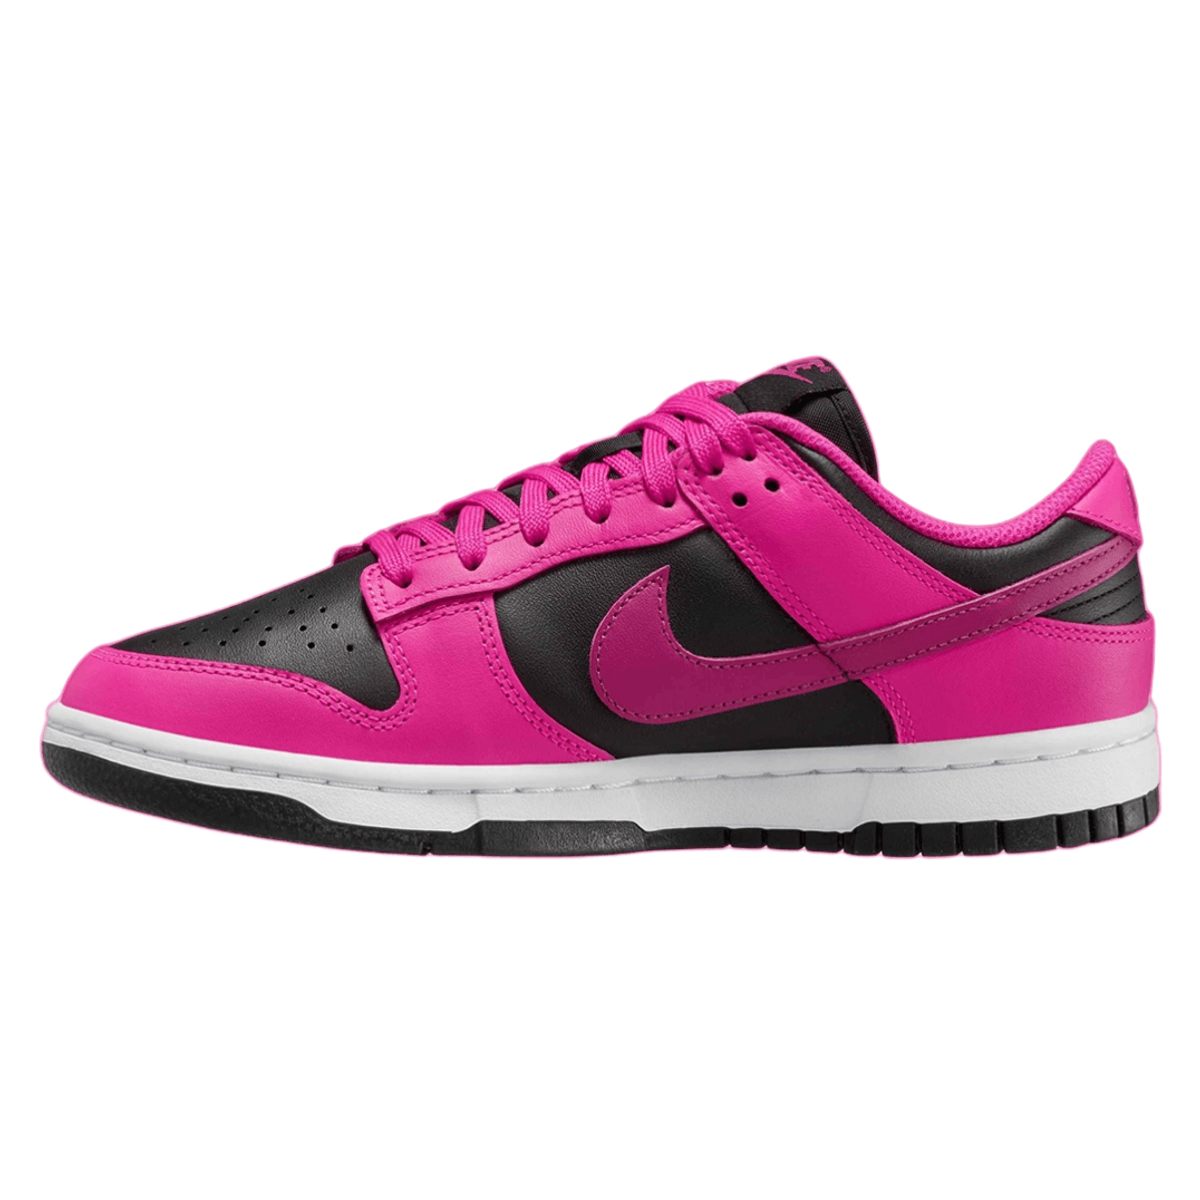 The Nike Dunk Low Fireberry Is The Newest Heat Coming In 2023